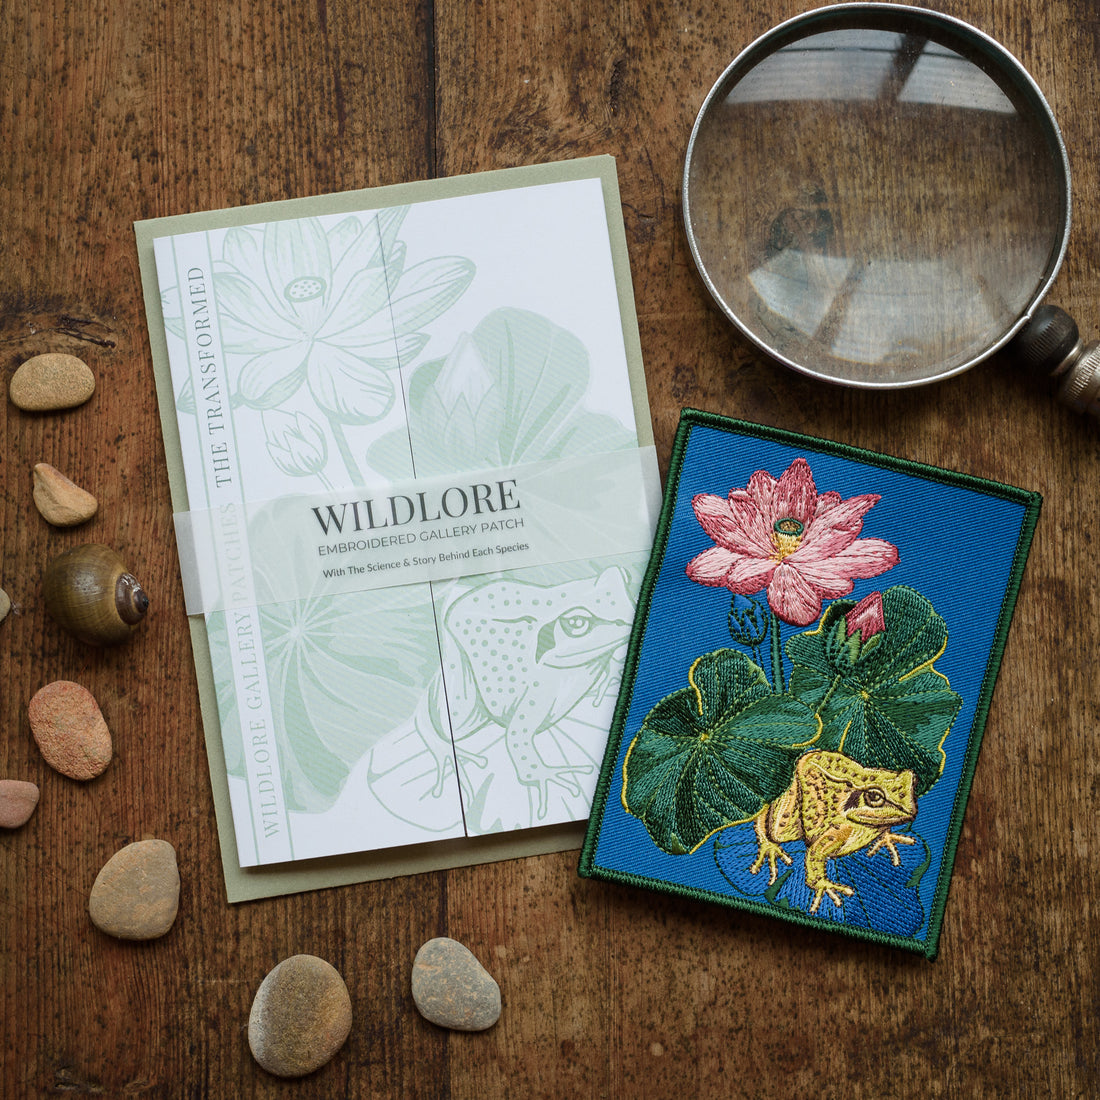 Frog and Lotus Embroidered Patch in gatefold card with science and story behind the species